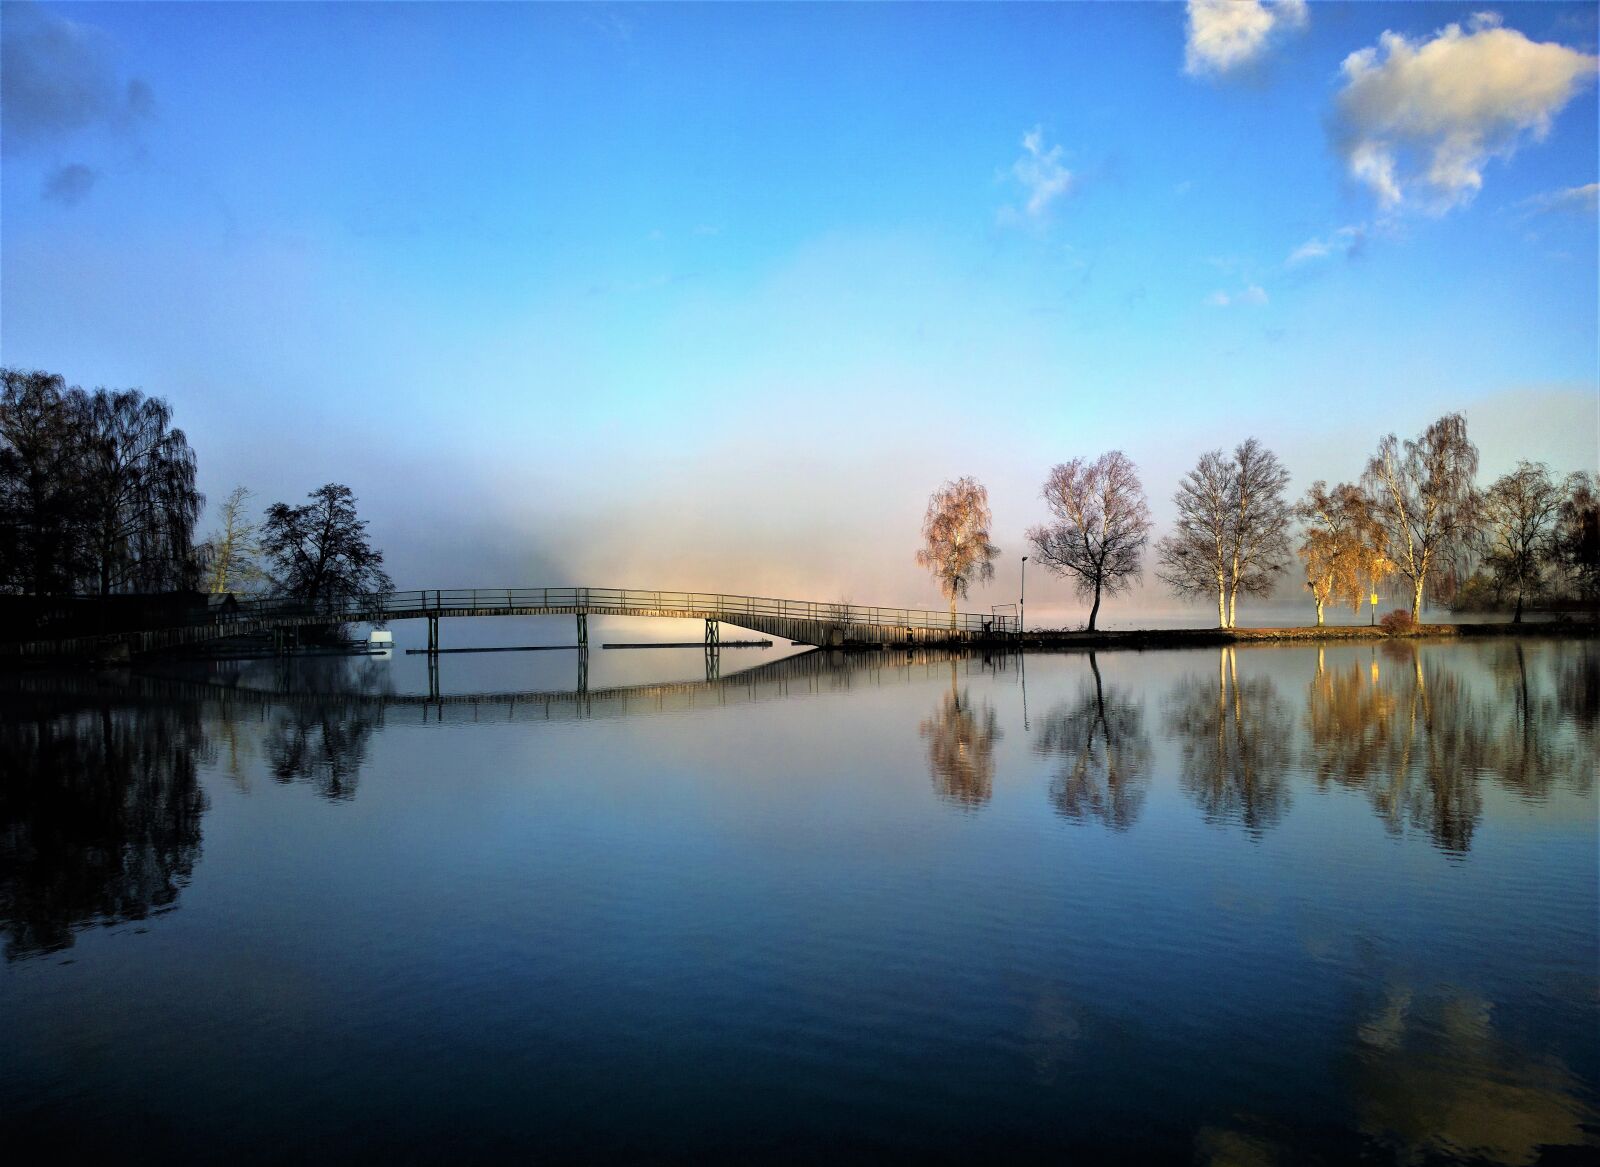 Nokia 808 PureView sample photo. Water, mist, mirroring photography